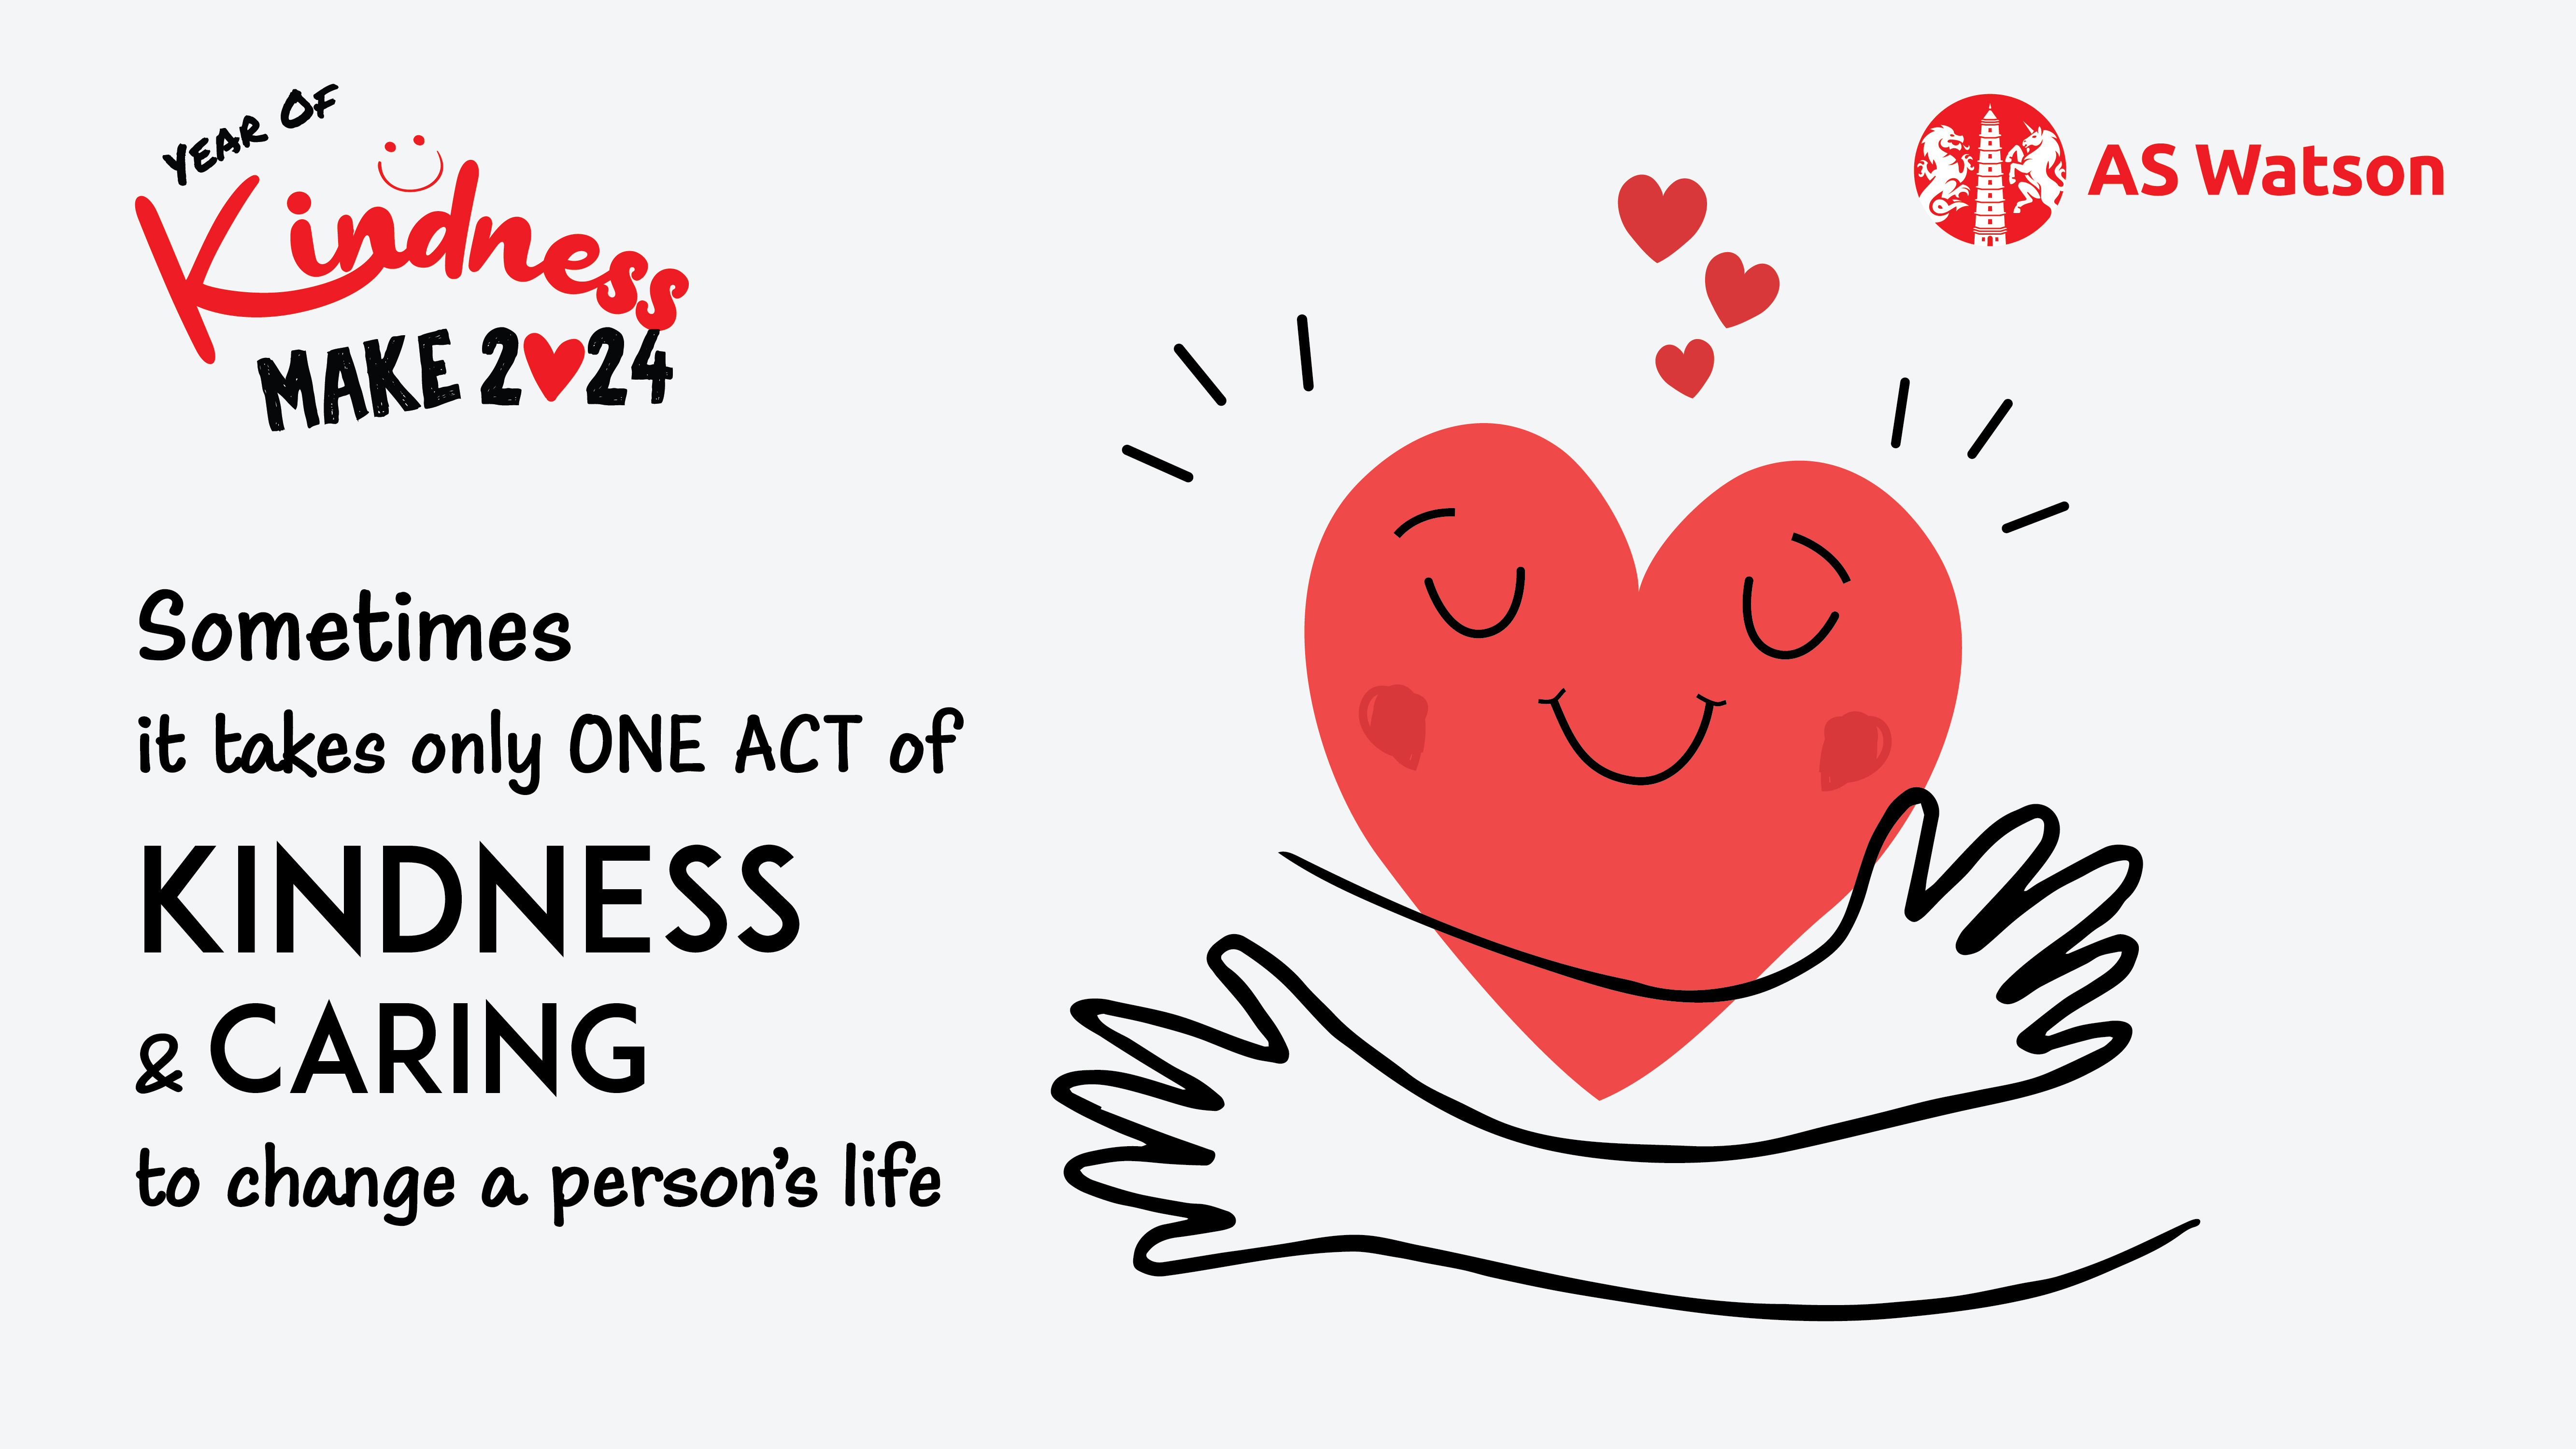 MAKE 2024 THEME – “YEAR OF KINDNESS”